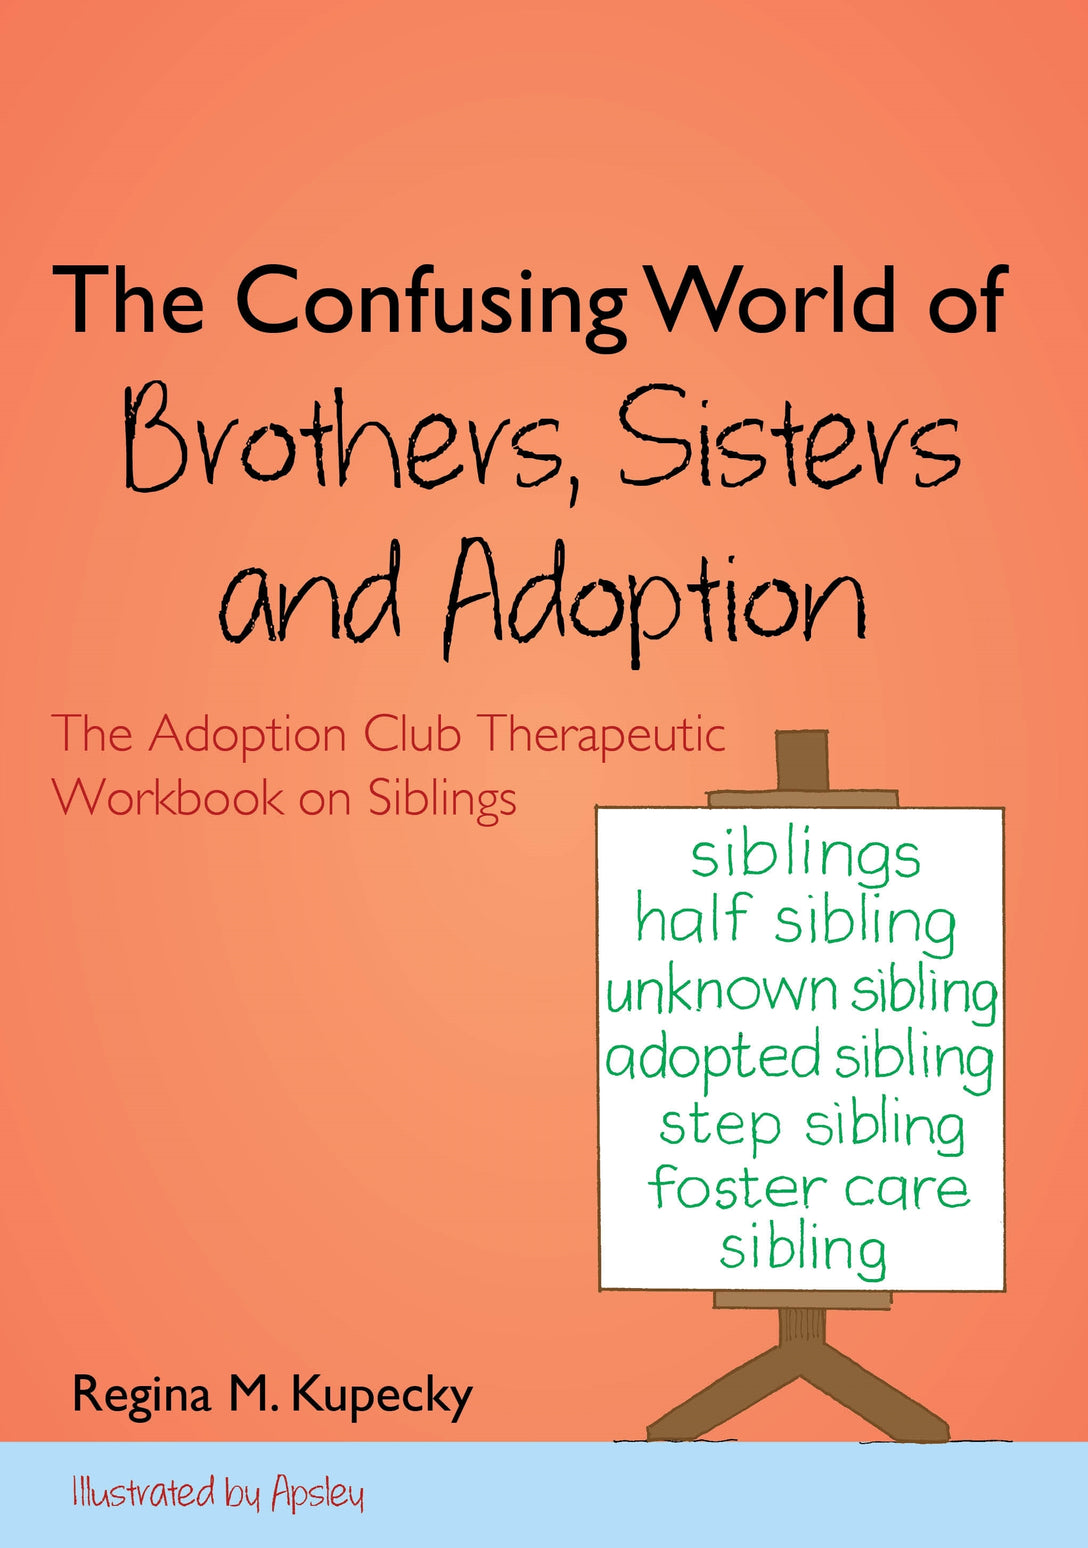 The Confusing World of Brothers, Sisters and Adoption by Regina M. Kupecky,  Apsley